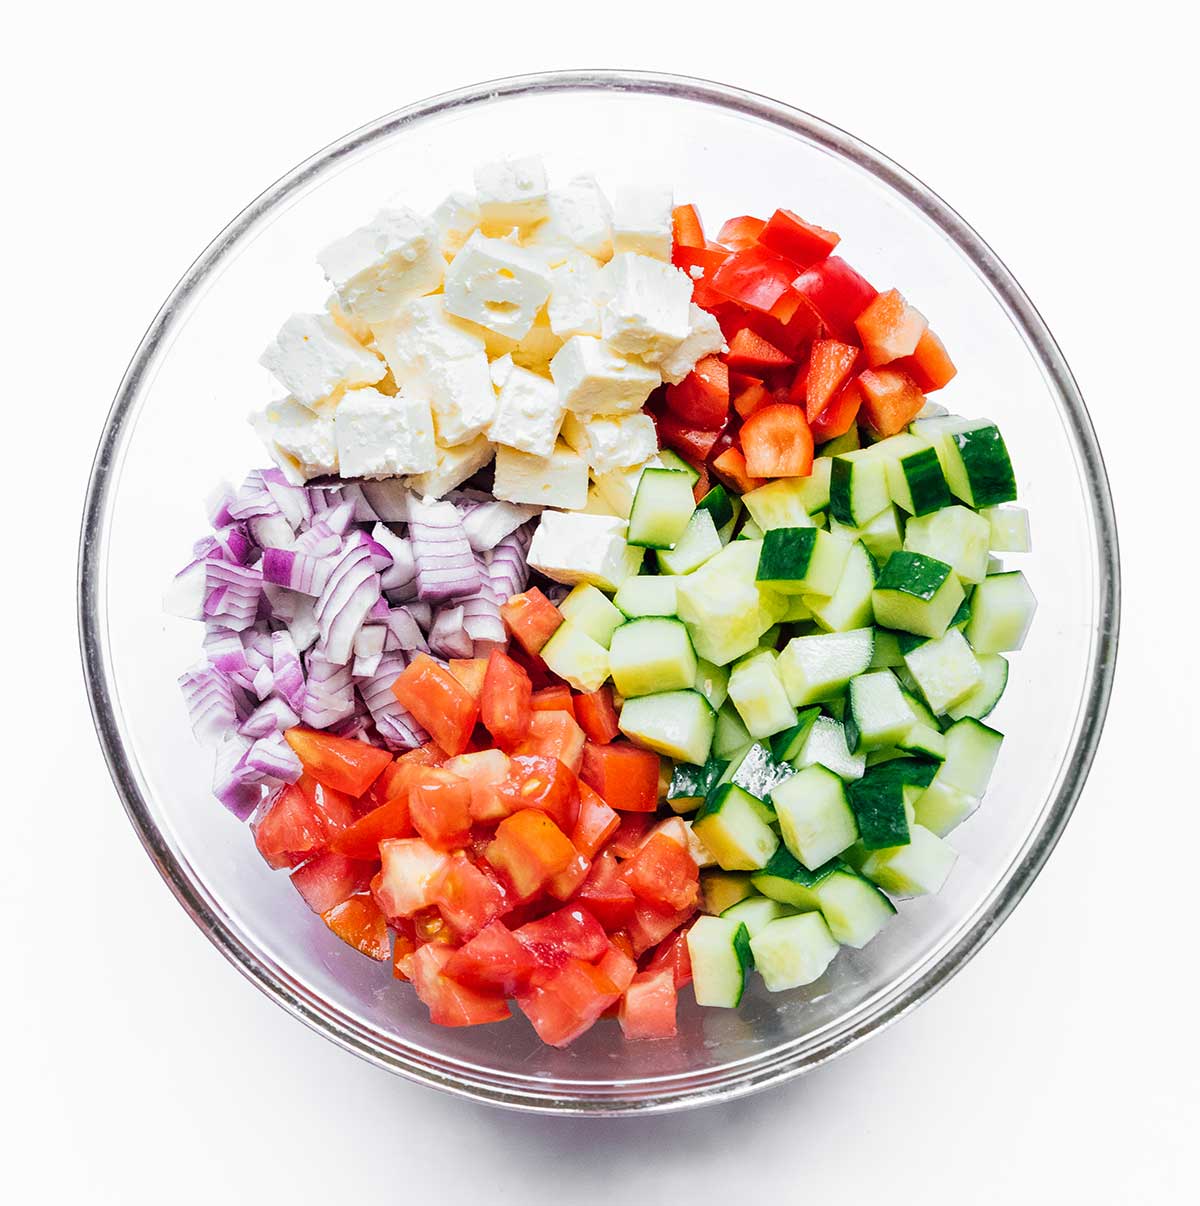 A glass dish filled with chopped salad ingredients including feta, red bell pepper, cucumber, tomatoes, and red onion